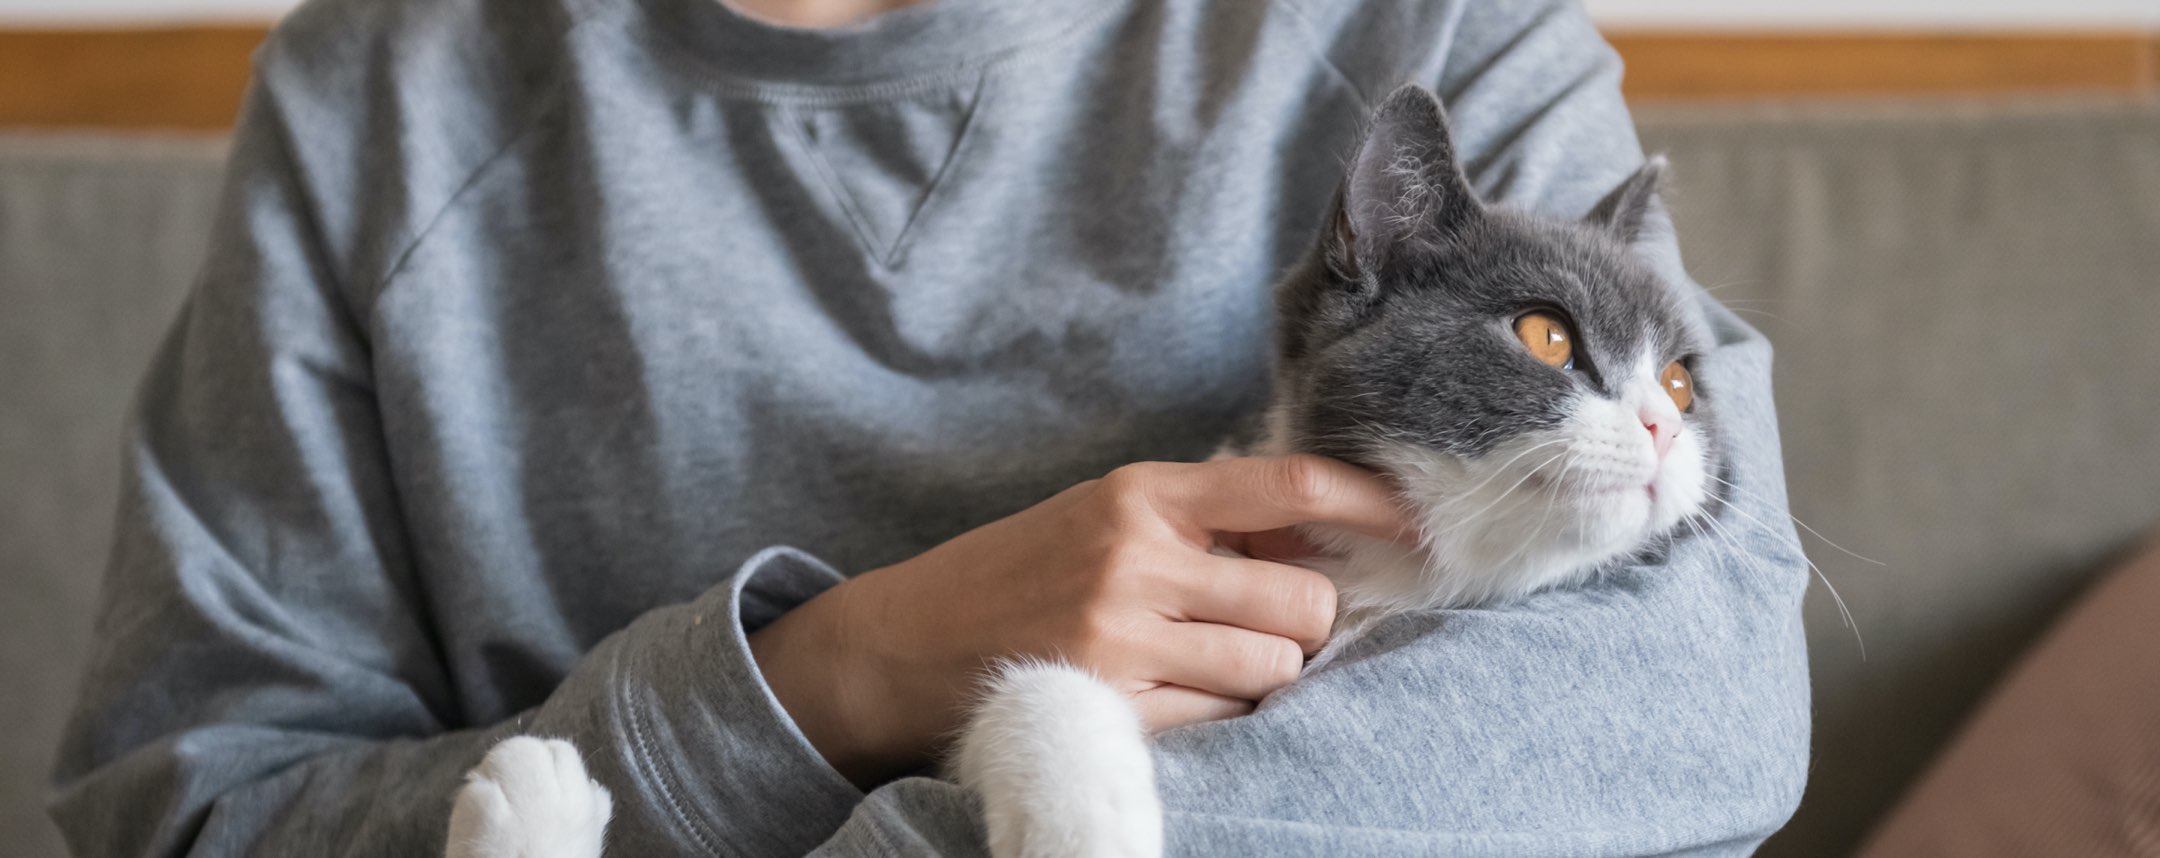 Person holding a grey cat